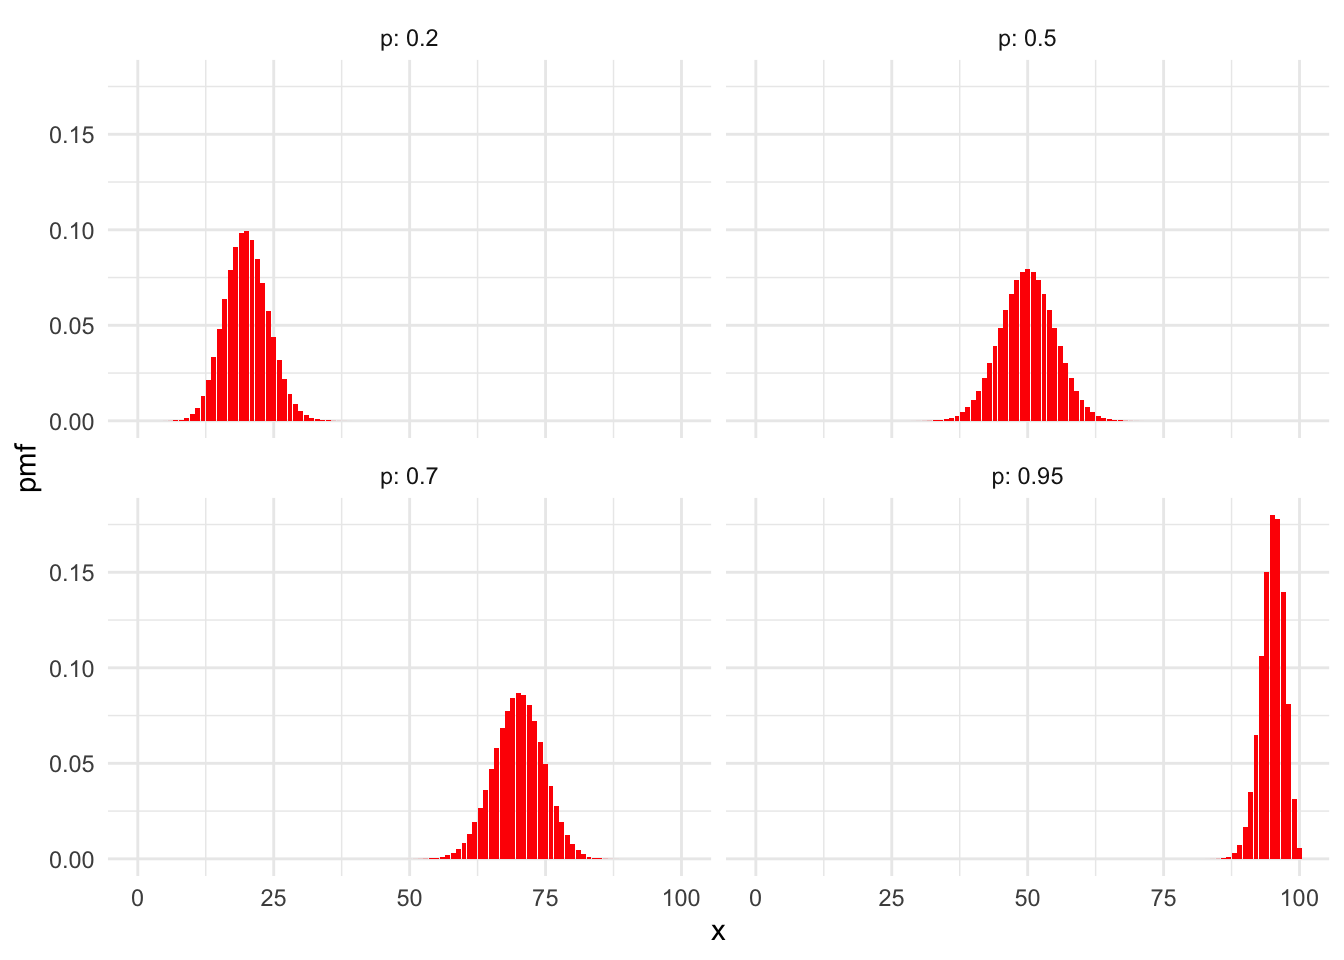 Binomial distributions with $n = 100$ and various values of $p$.